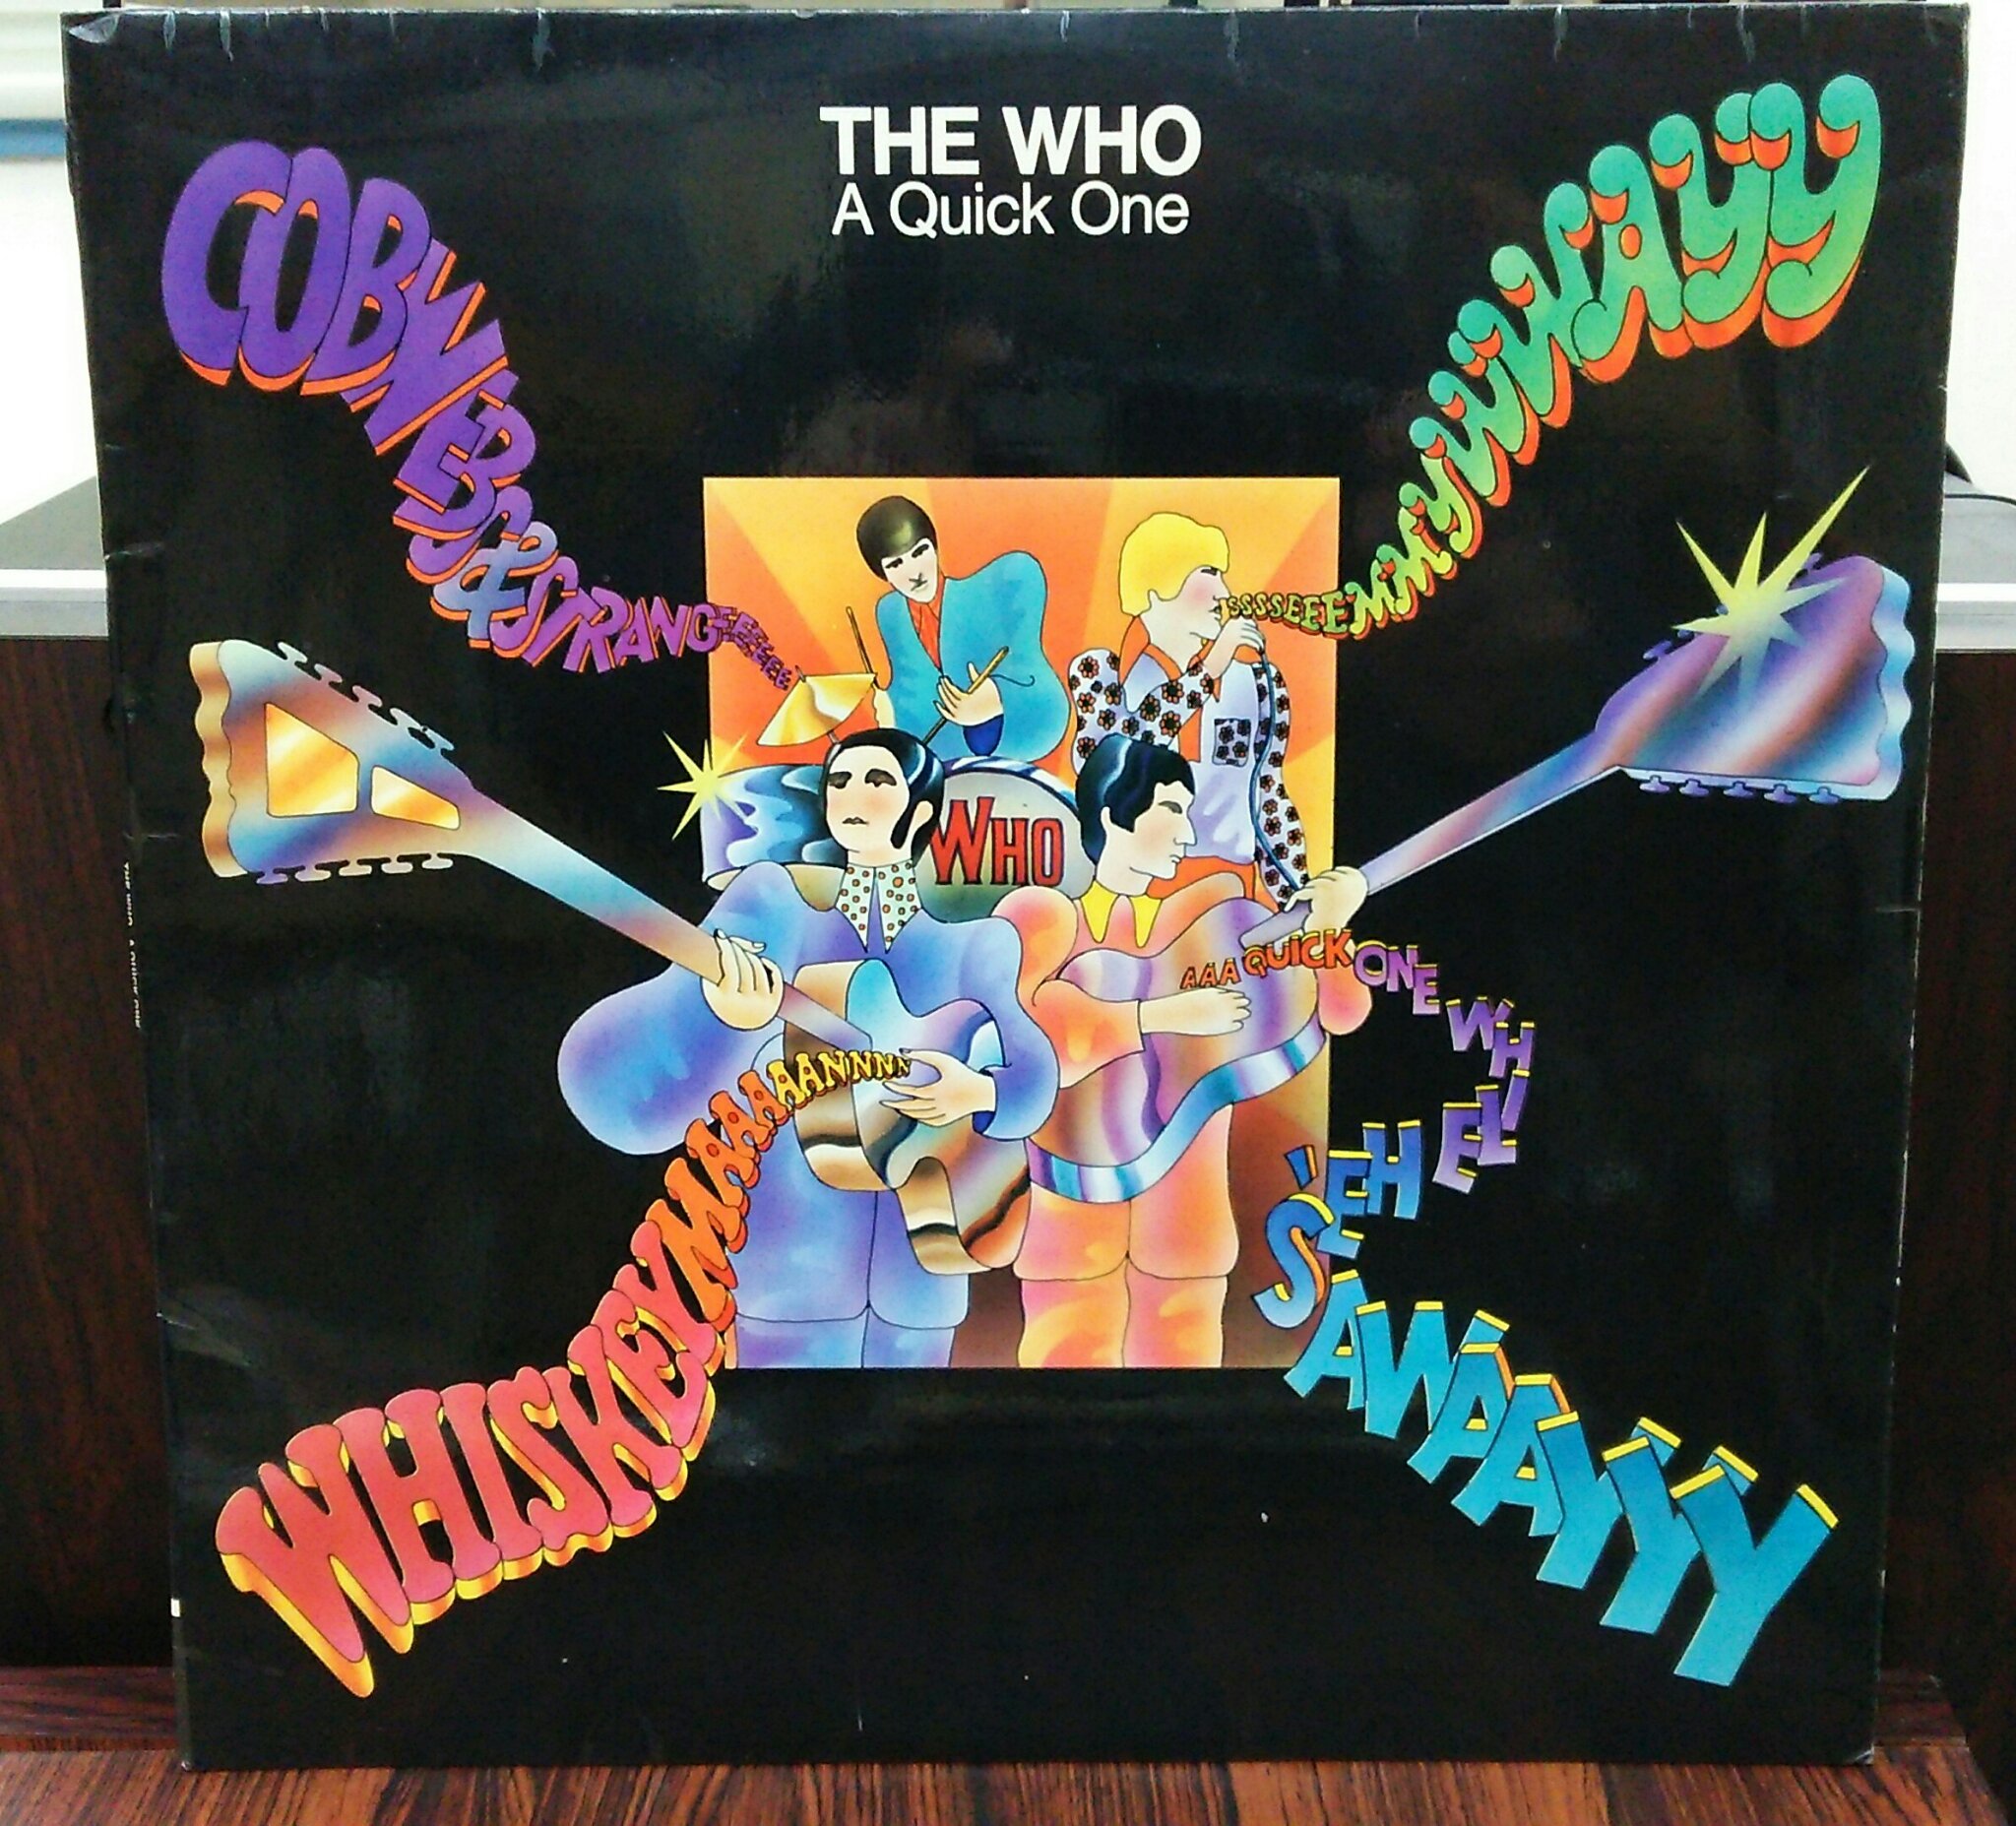 The Who / A Quick One

Happy birthday Roger Daltrey                                 